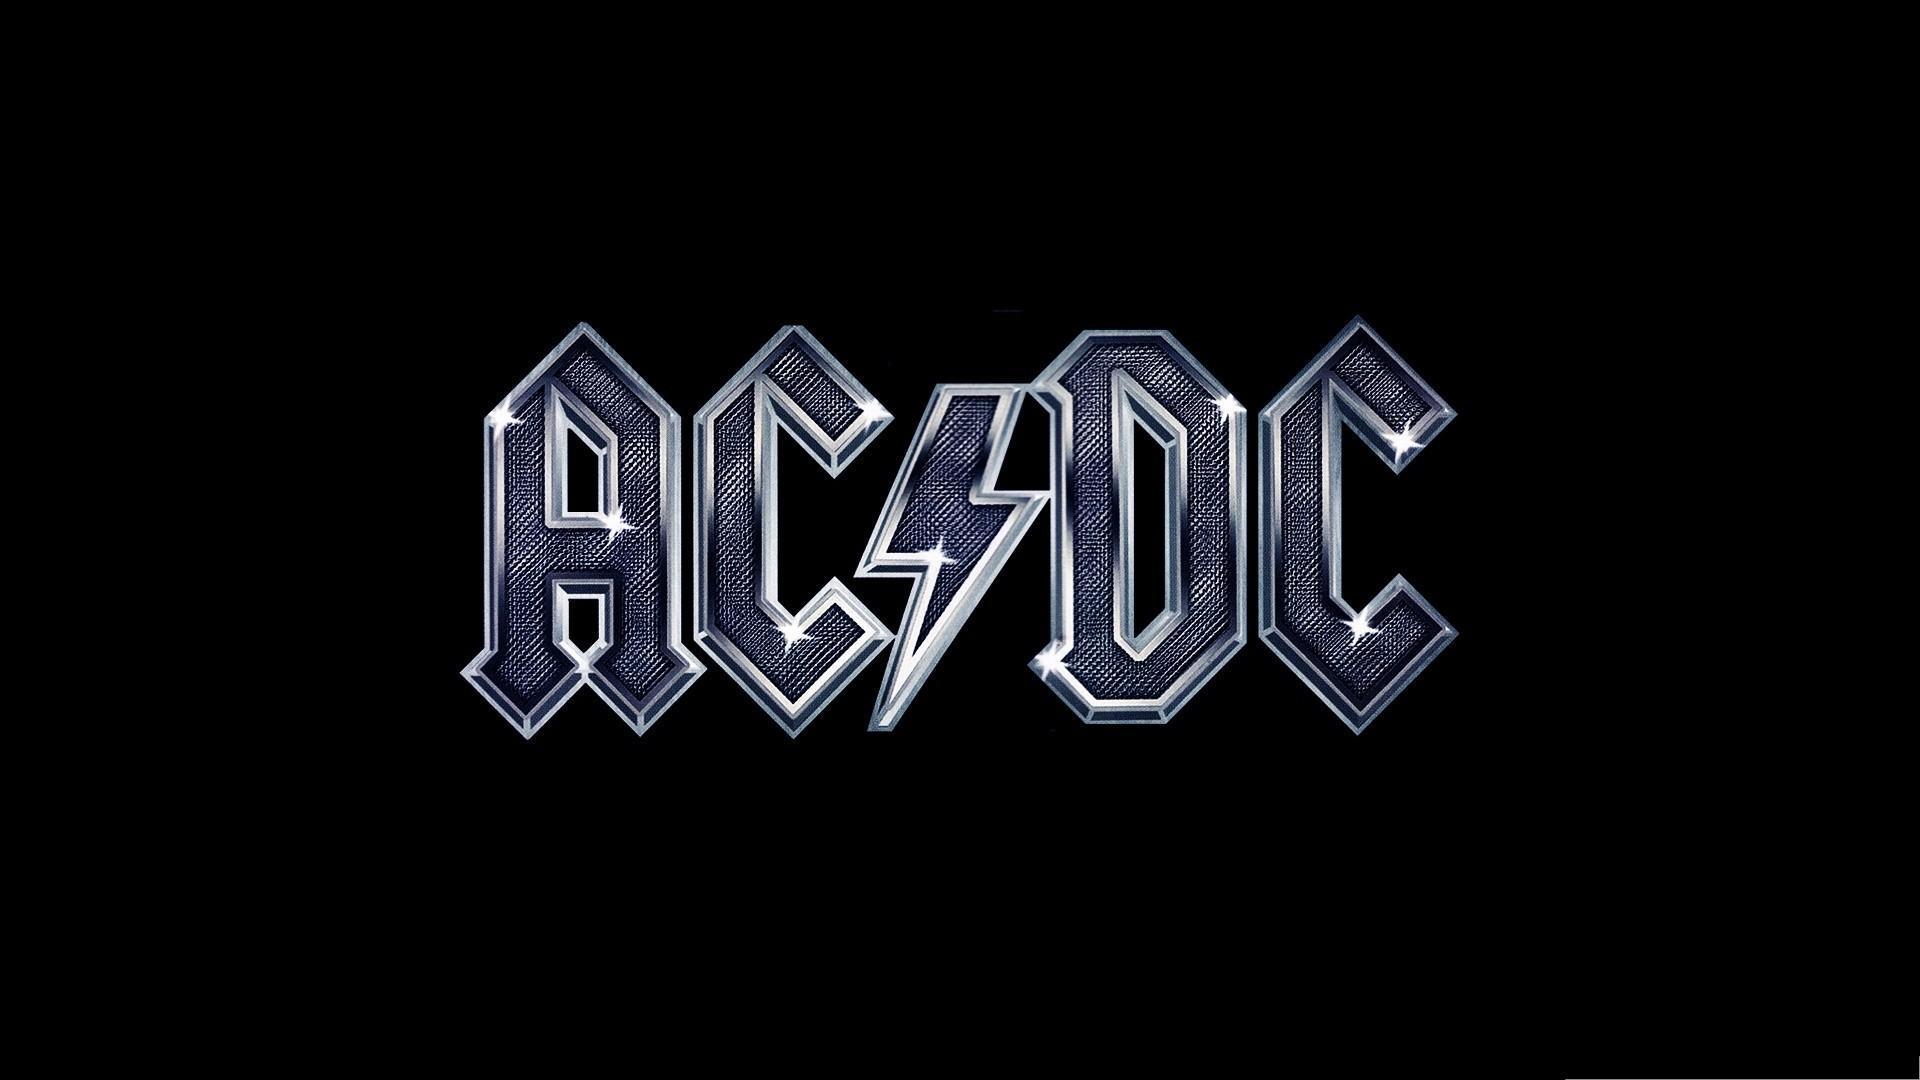 acdc wallpapers classic hard rock hd Wallpapers Photos